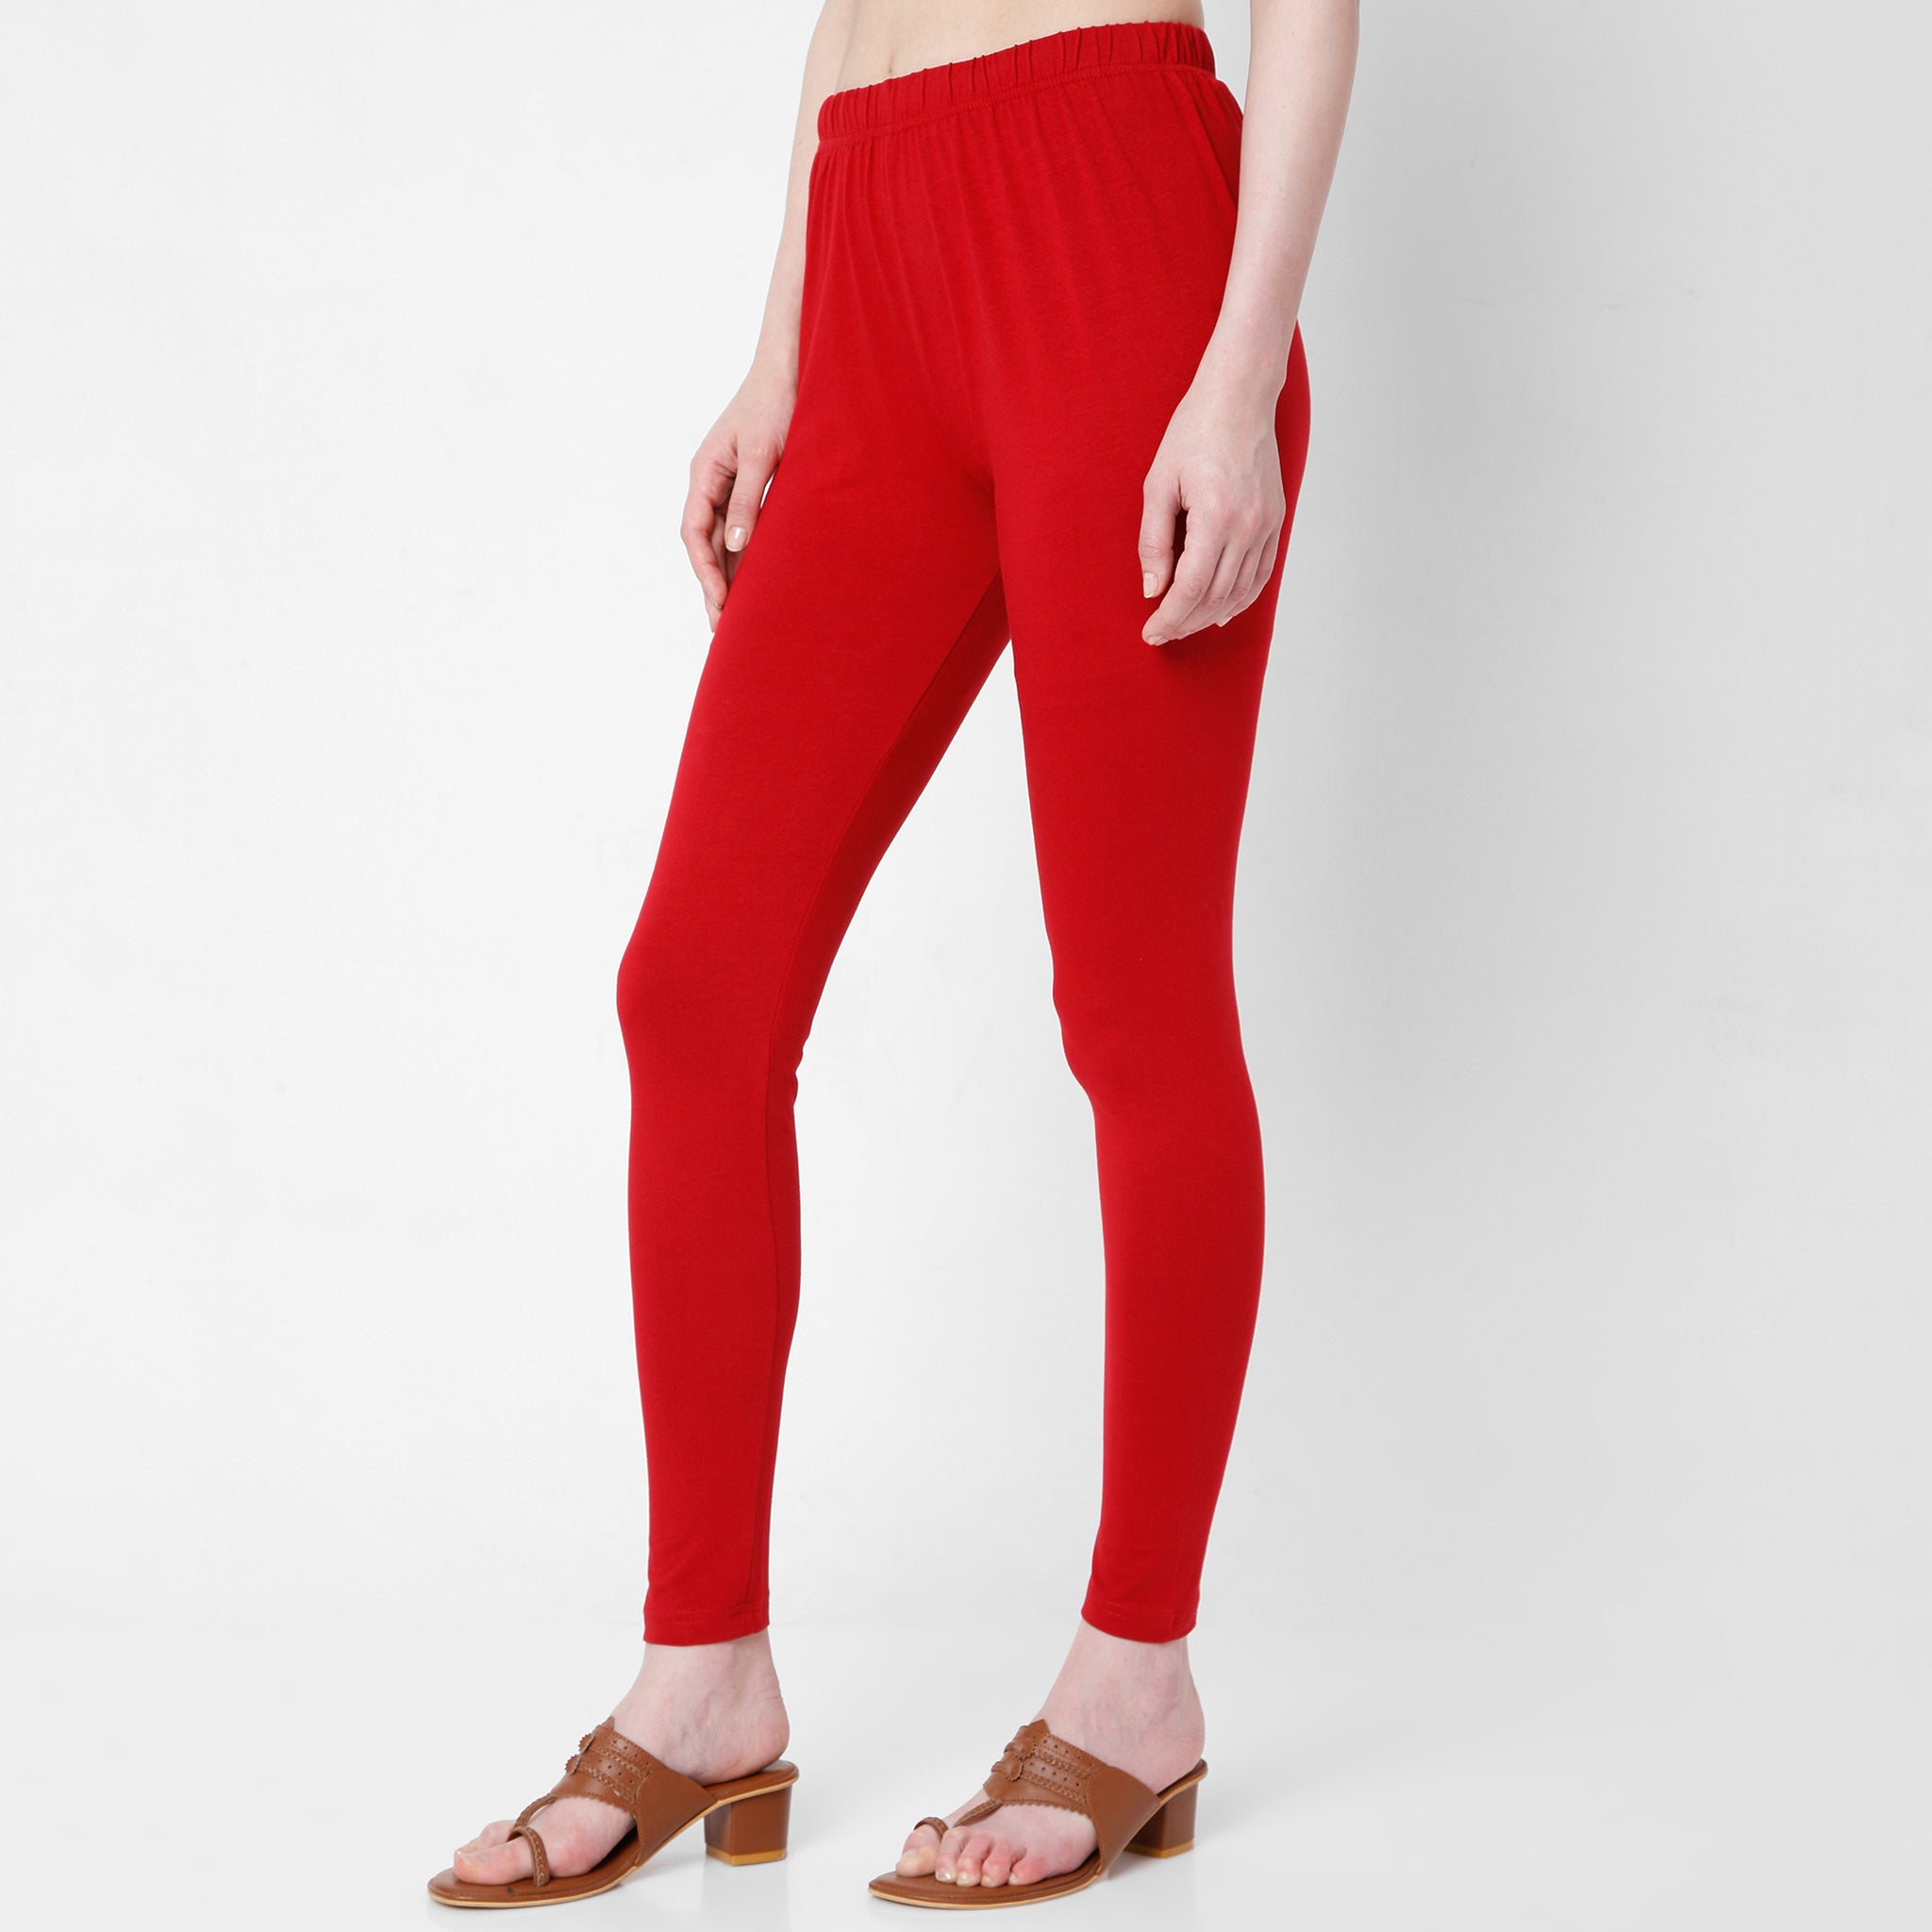 Red legi for casual use daily purpose fancy elegant basic new